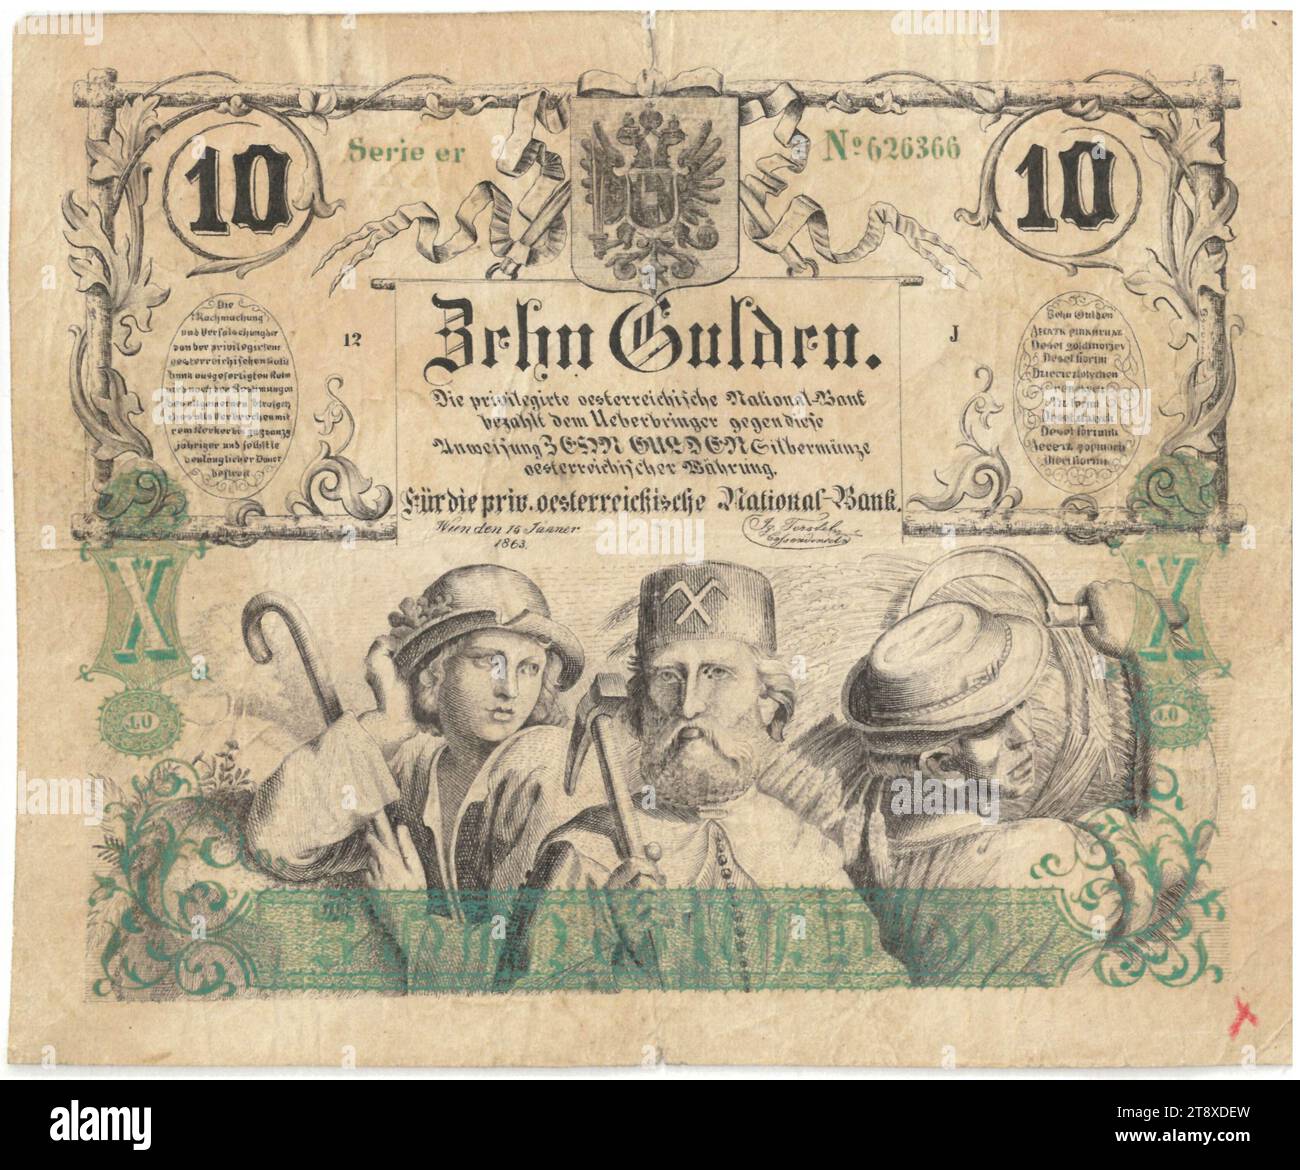 Banknote (forgery), 10 florins, Privilegierte Österreichische National-Bank, mint authority, Date after 15.01.1863, paper, printing, width 142 mm, height 115 mm, Mint, Vienna, Mint territory, Austria, Empire (1804-1867), Finance, counterfeit, forgery, farmers, working class, laborers, coat of arms (as symbol of the state, etc.), bank-note, money, The Vienna Collection Stock Photo